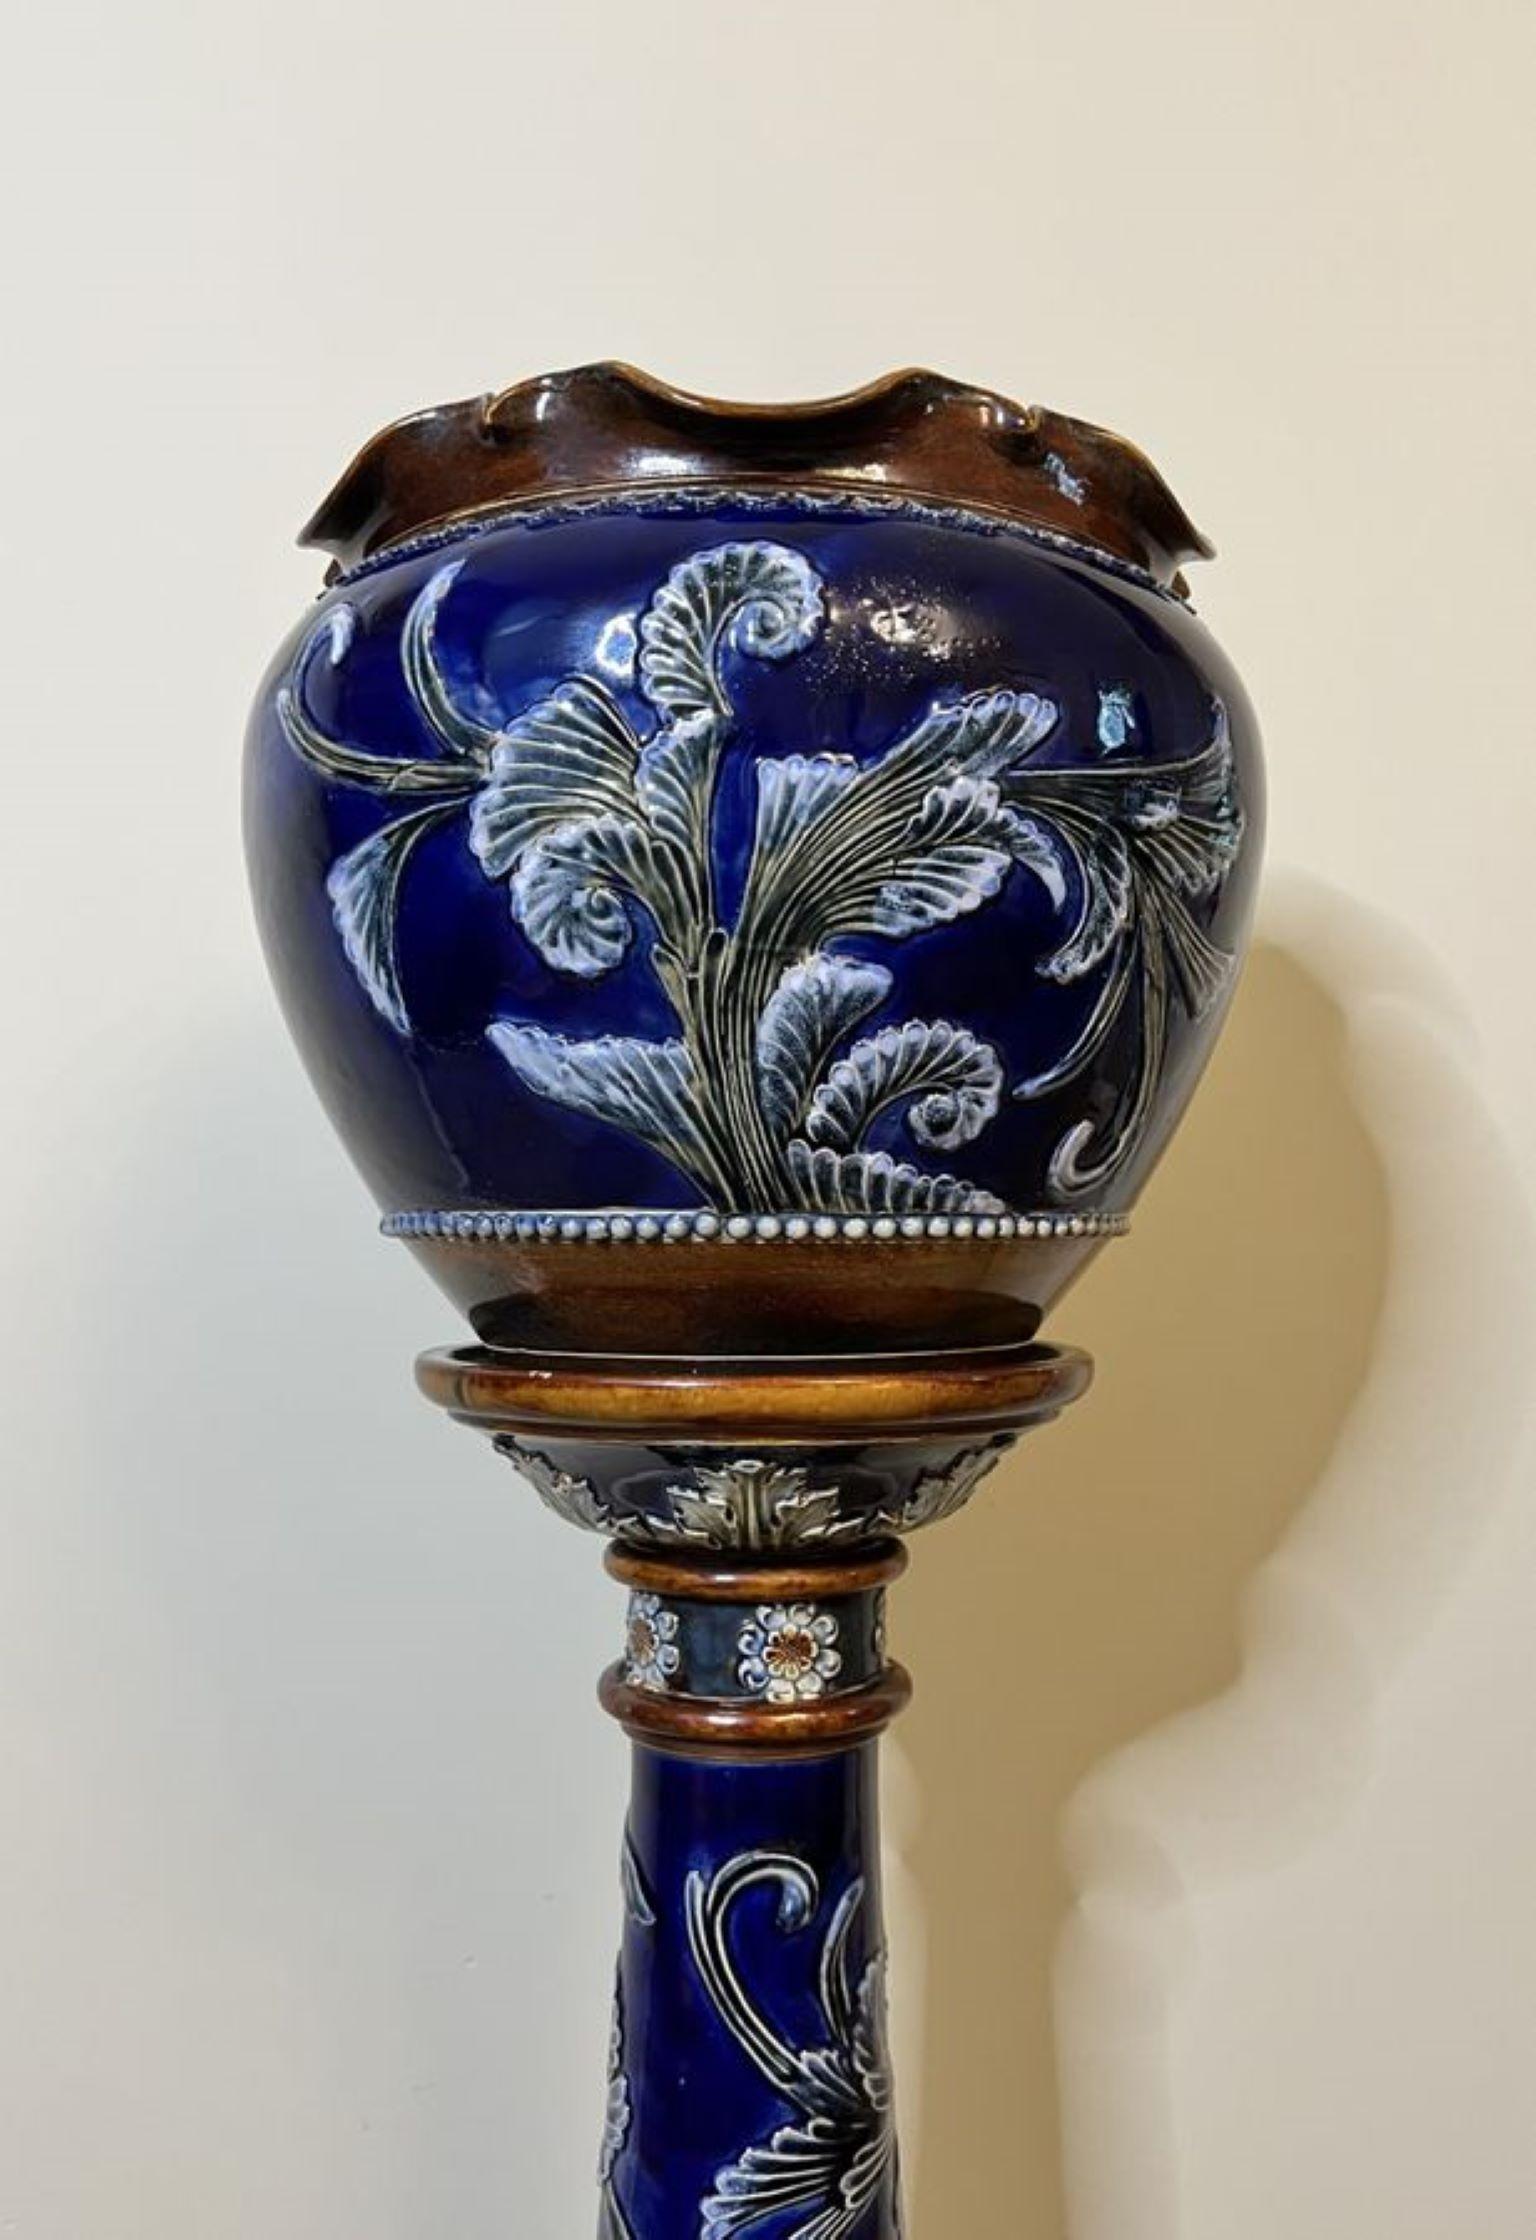 Sunning quality antique Royal Doulton jardiniere on a stand having a quality jardiniere with a wavy shaped top with a blue ground decorated with flowers and leaves in lovely blue and green colours, on the original pedestal standing on a circular